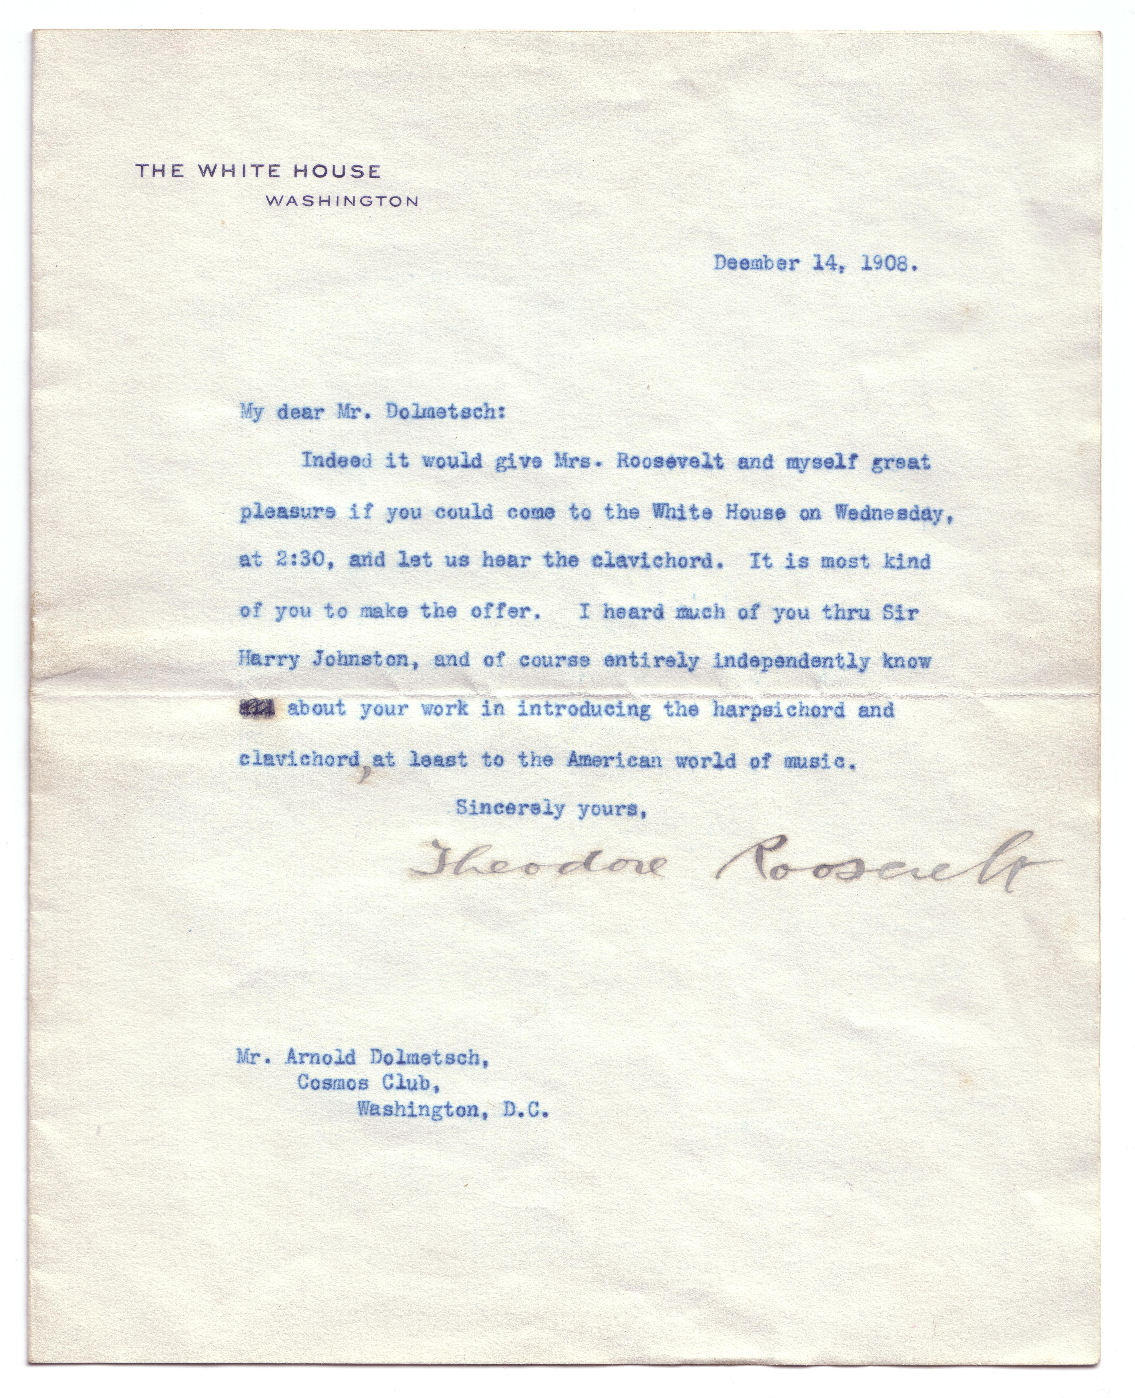 Theodore Roosevelt invites Arnold Dolmetsch to the White House (14 Dec. 1908)